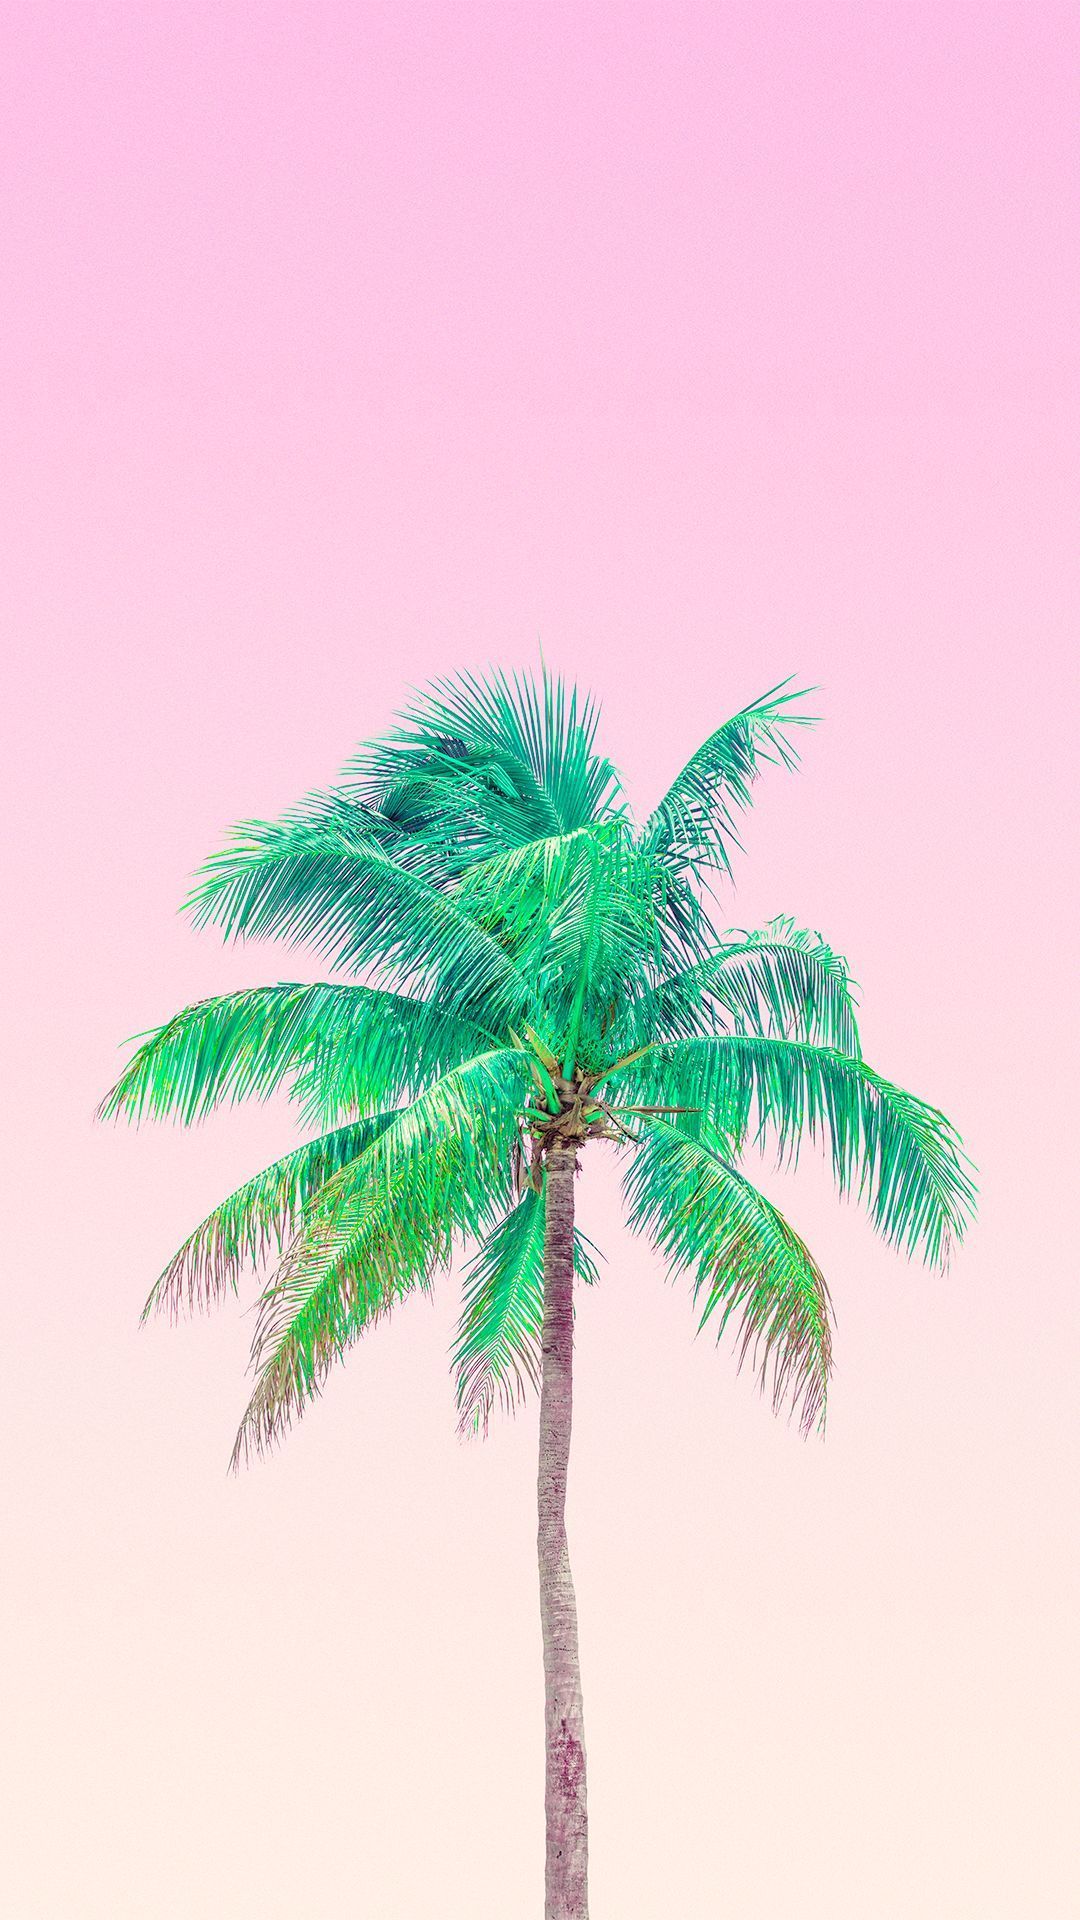 IPhone wallpaper of a palm tree in front of a pink sky - Palm tree